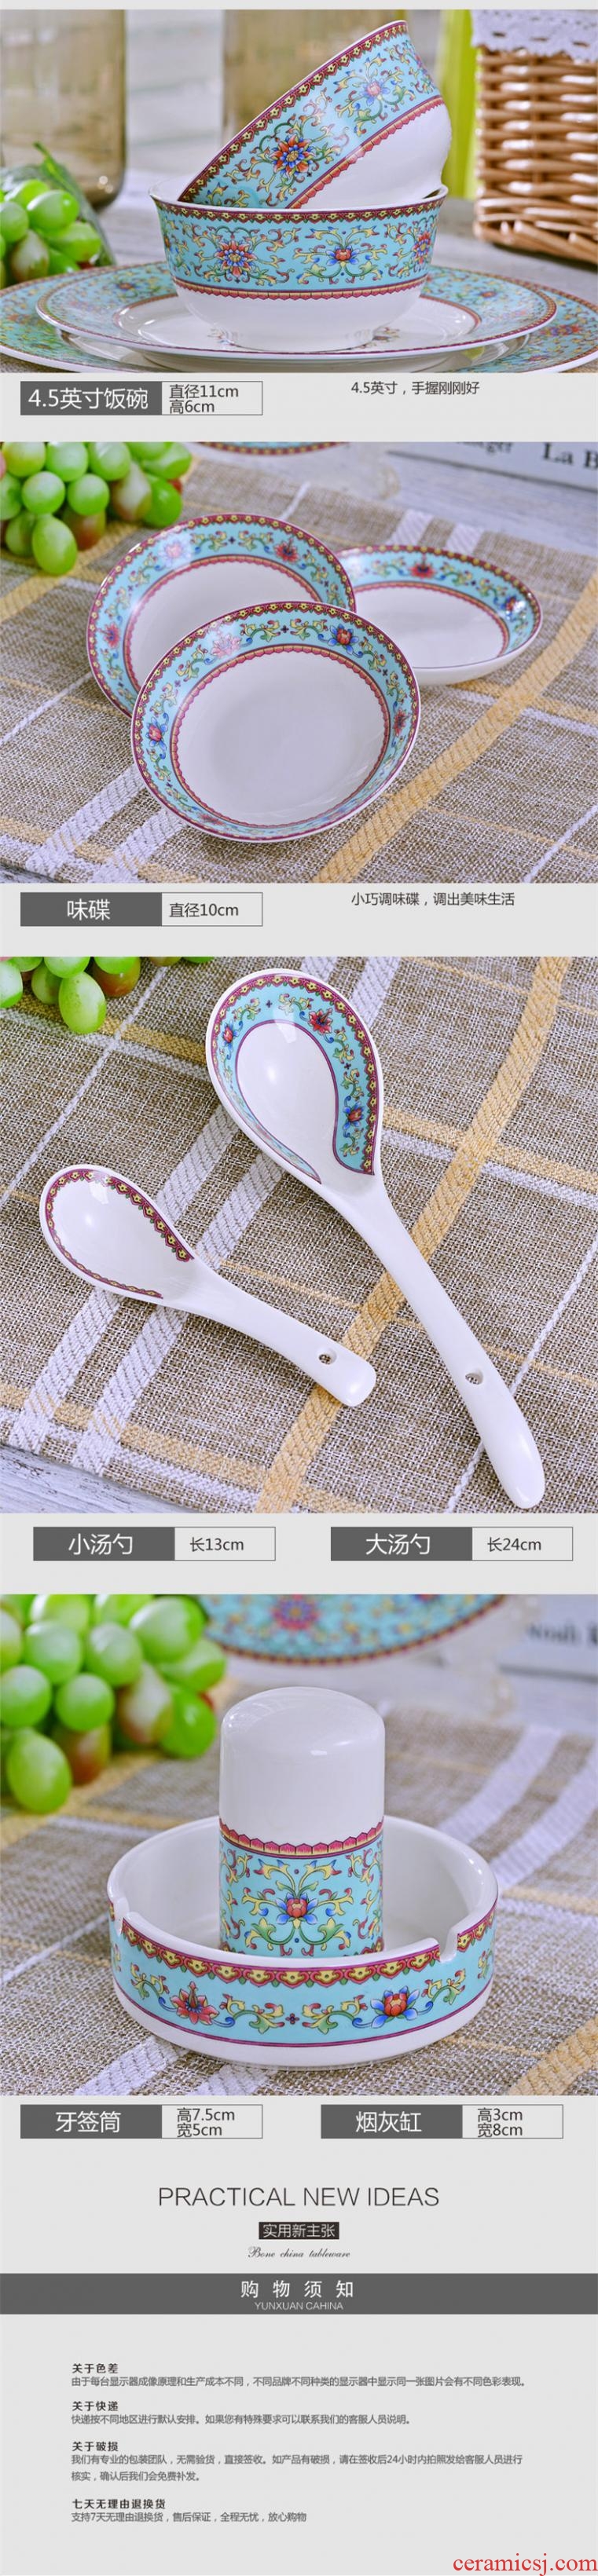 Jingdezhen dishes and cutlery set home to eat noodles in soup bowl of Europe type style bone porcelain ceramic dishes chopsticks combination